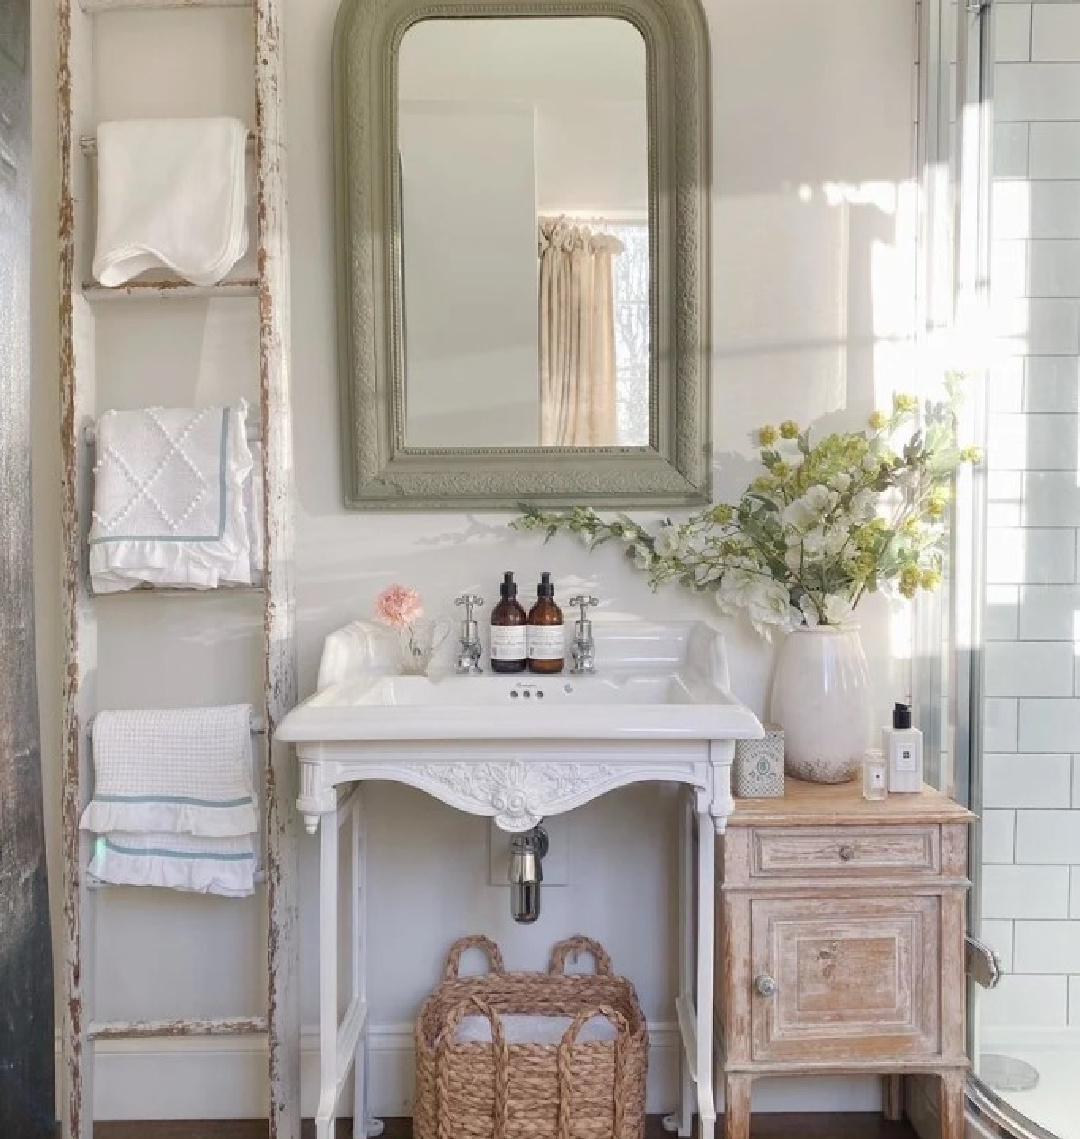 Farrow & Ball Strong White in a beautiful vintage bathroom by @wallflower_cottage